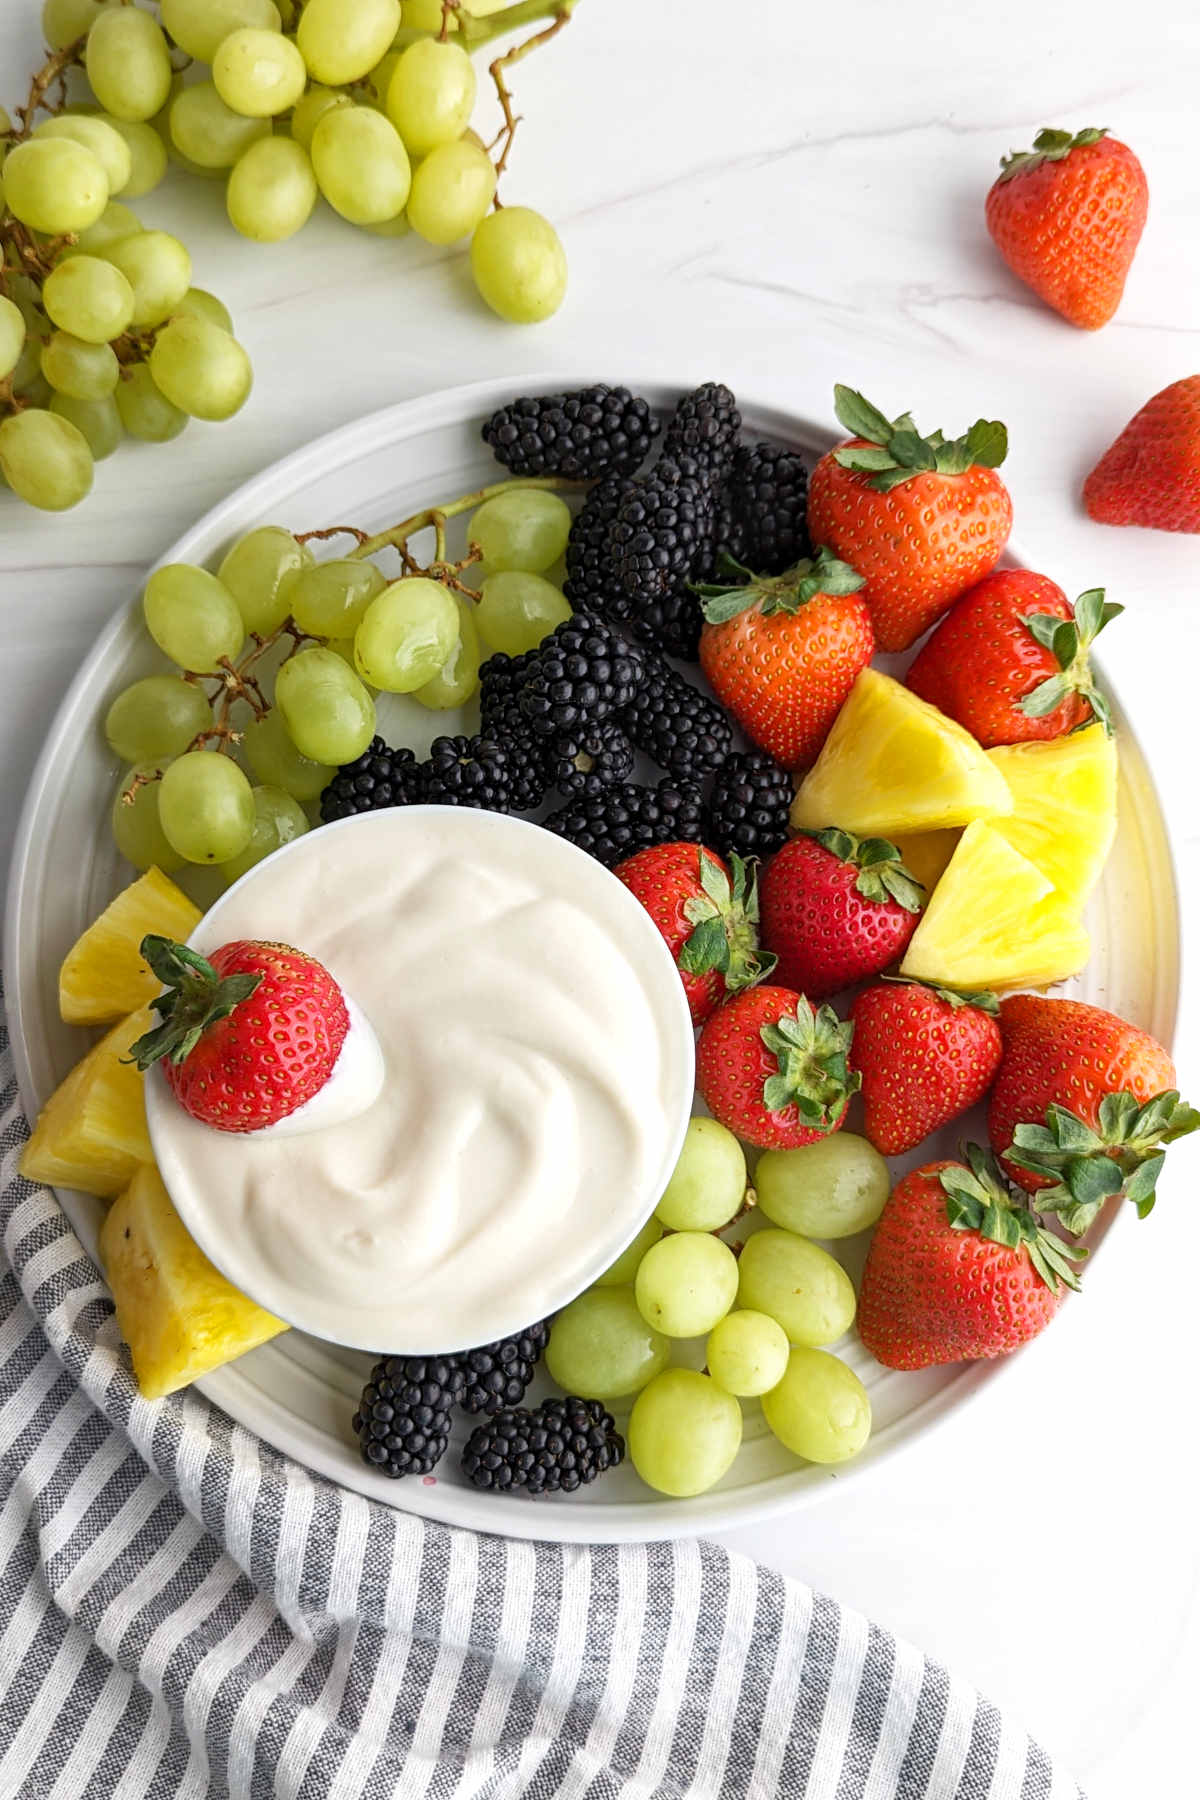 A fruit platter with various fruits and served with vegan fruit dip.